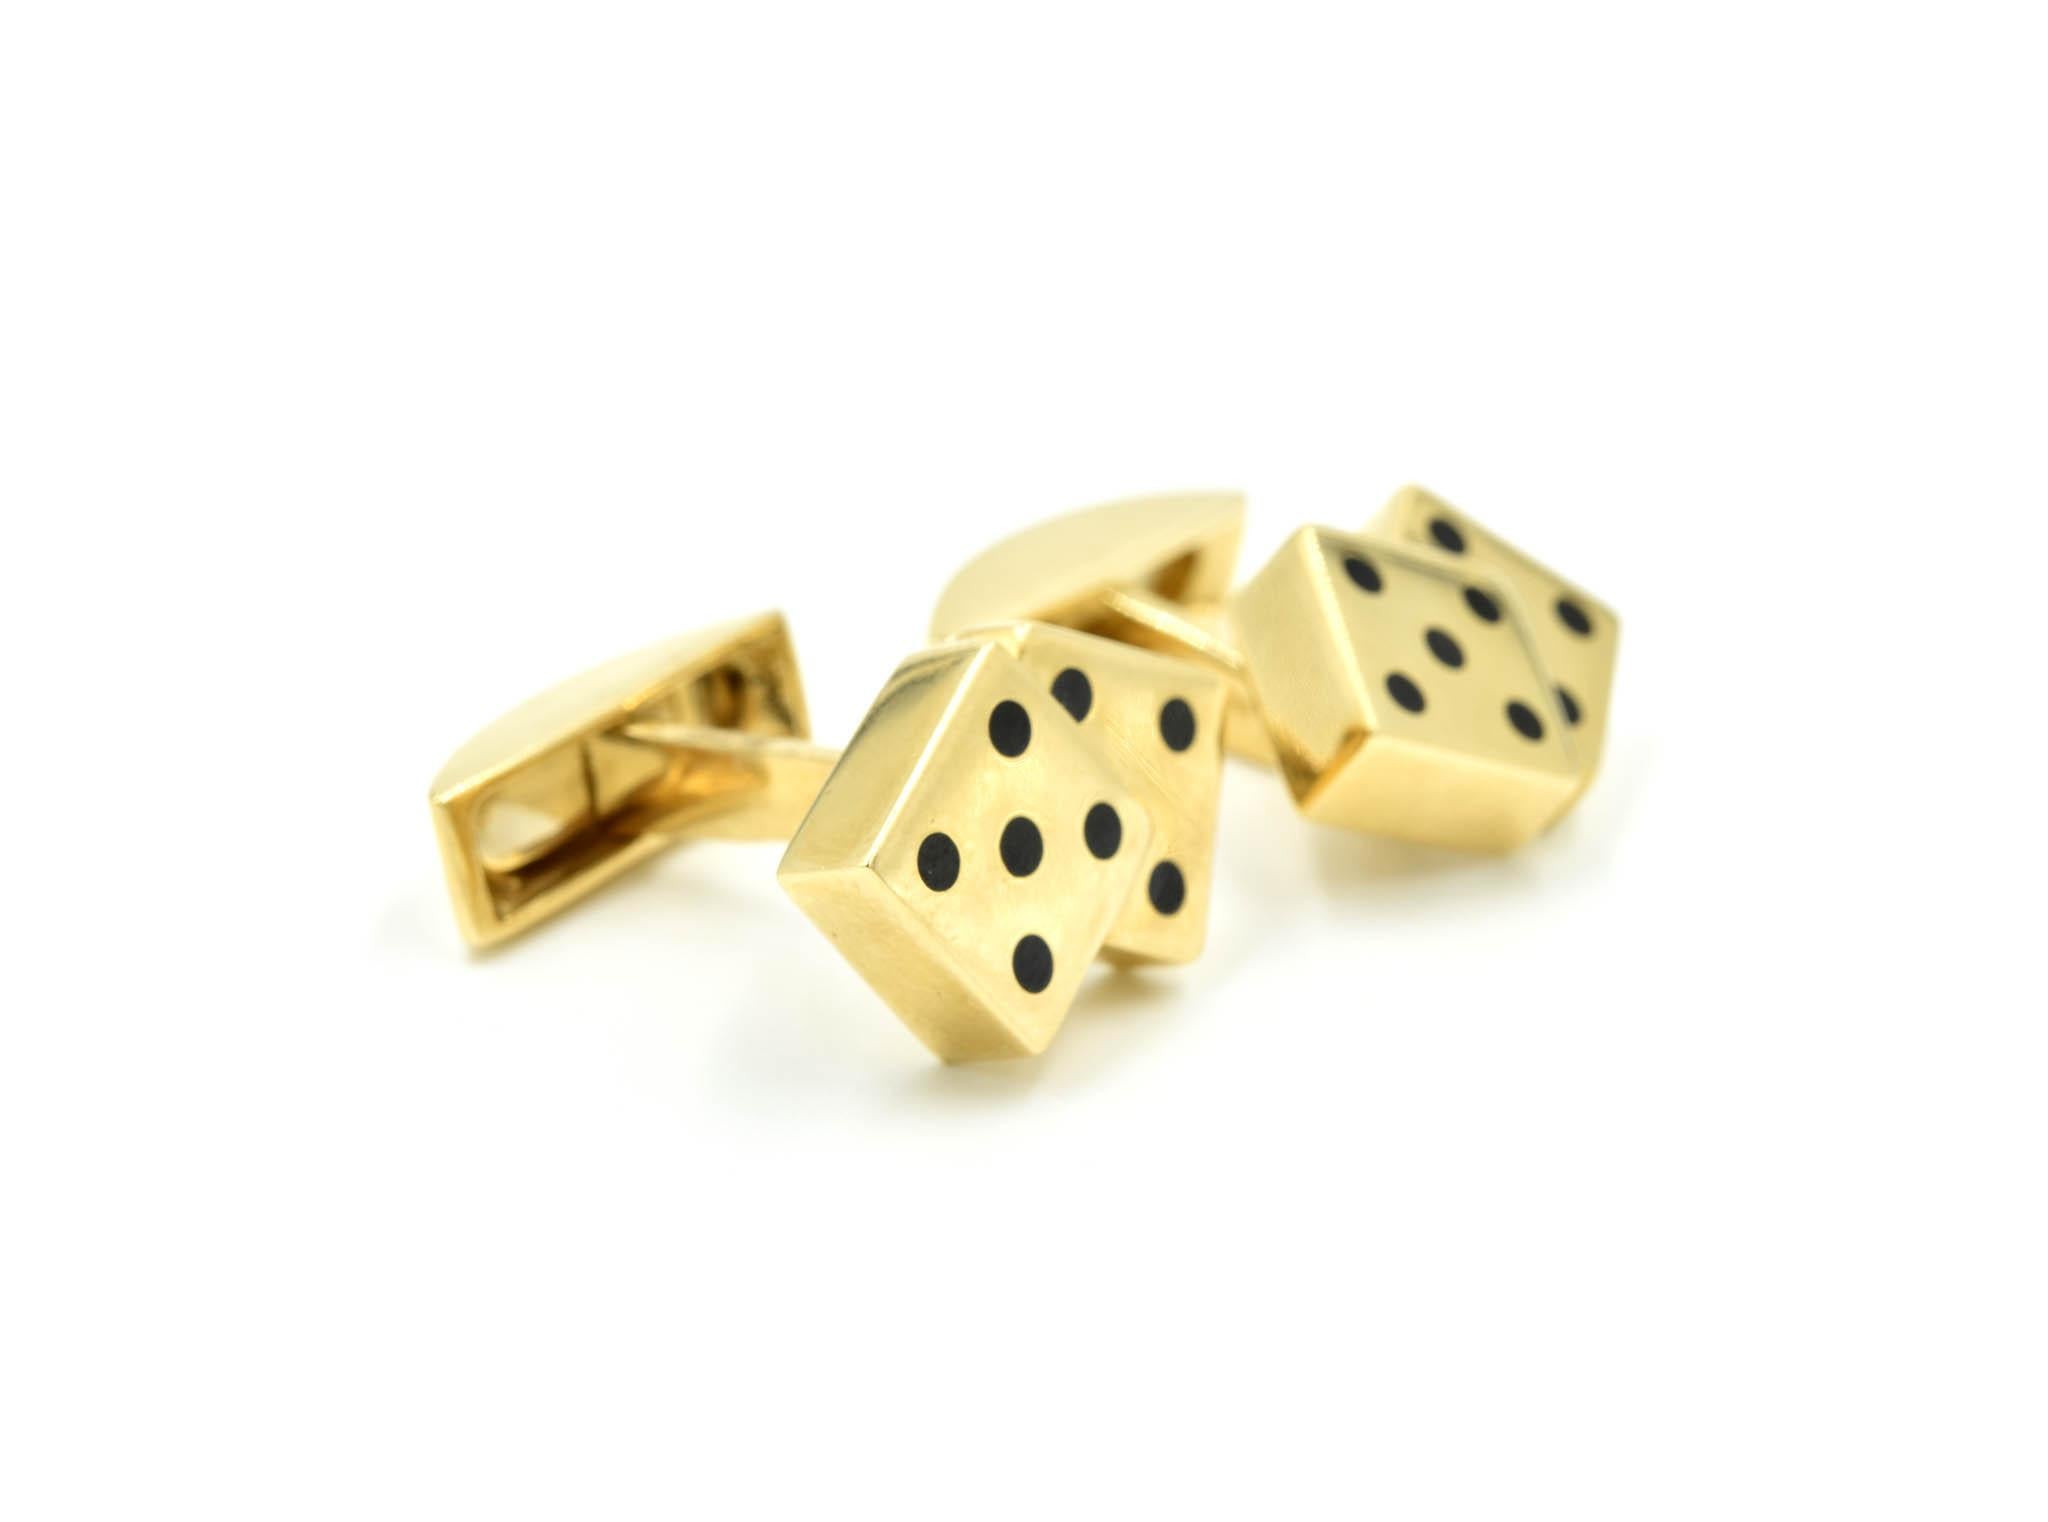 These unique cufflinks are perfect for your next trip to Vegas! Made in 18k yellow gold, each measures 17x12mm. The pair weighs 16.6 grams.